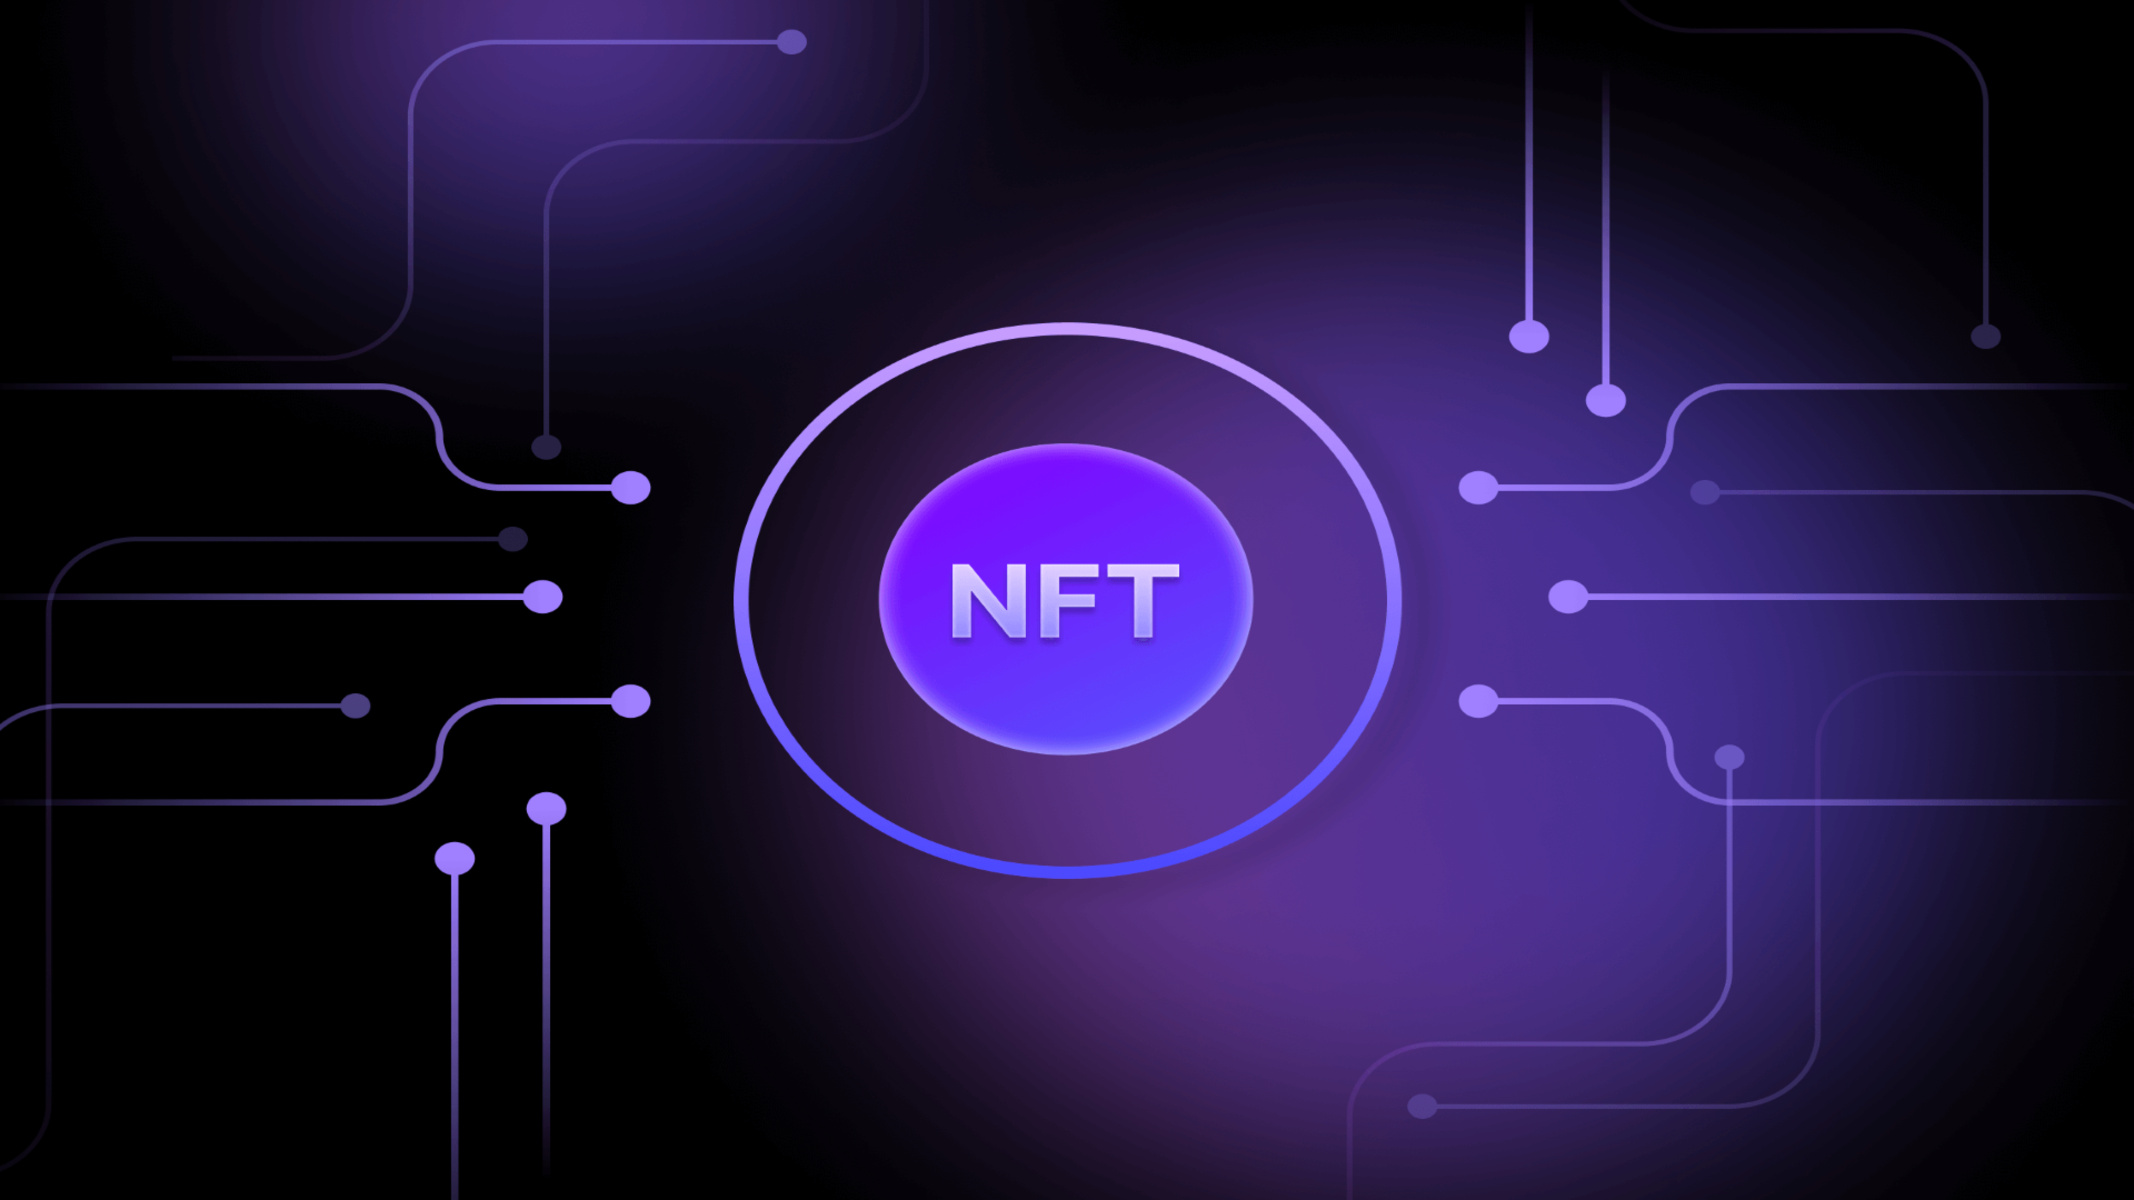 How To Mint An NFT On Cardano